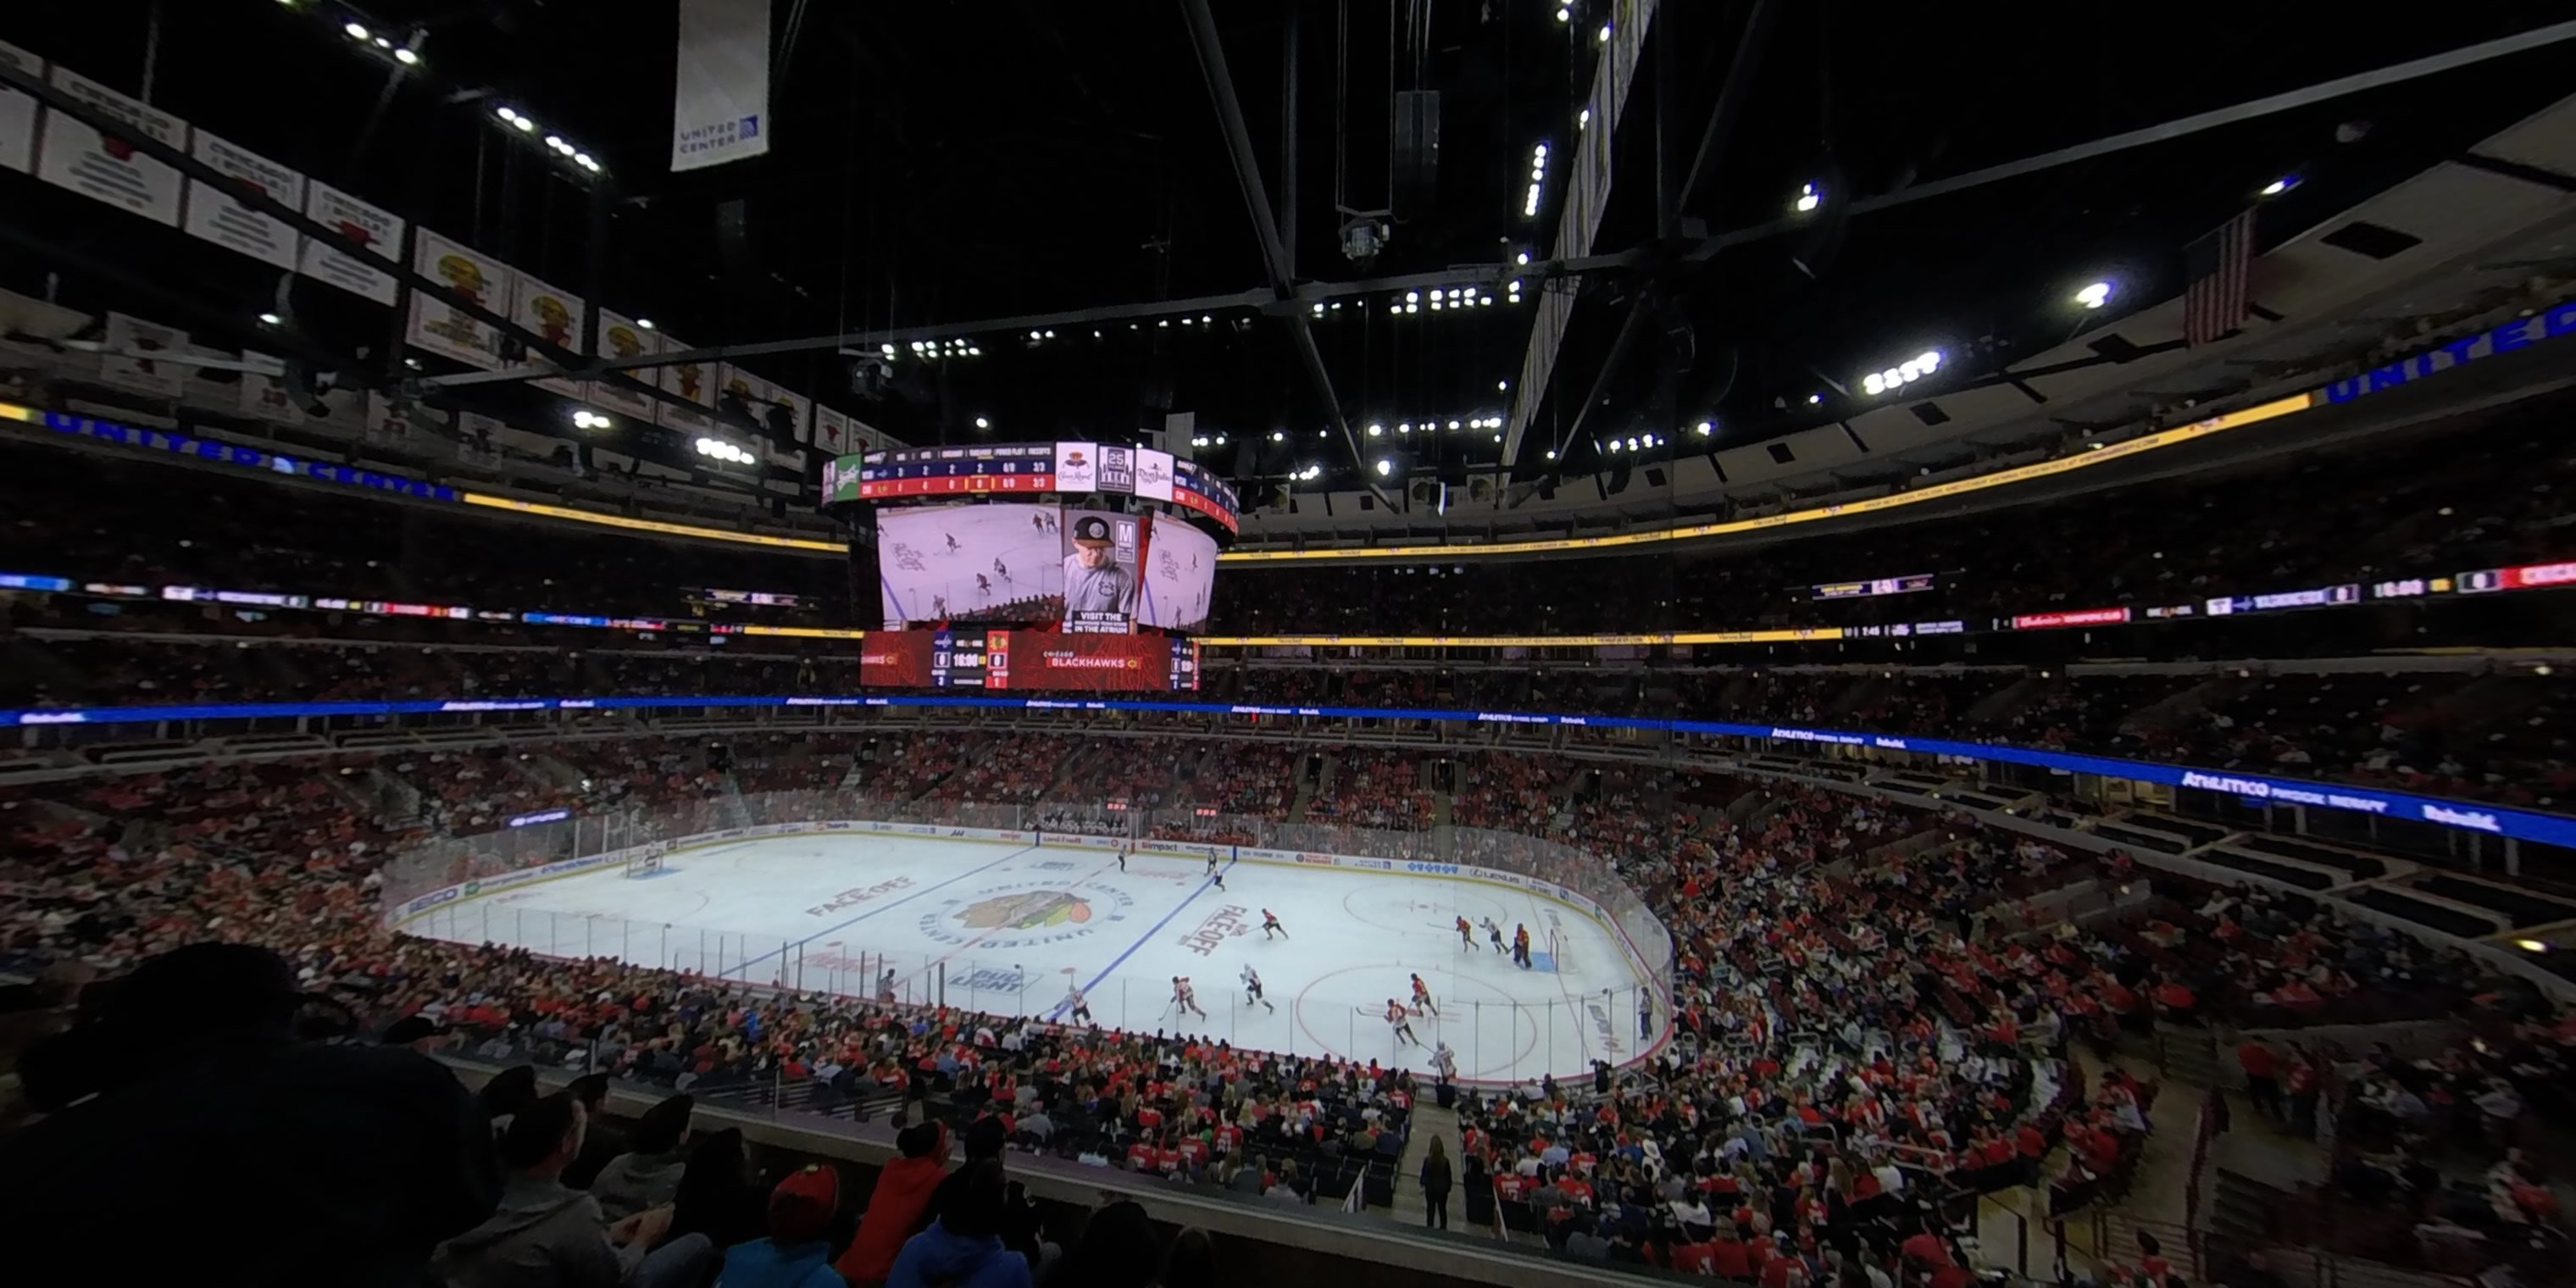 section 215 panoramic seat view  for hockey - united center